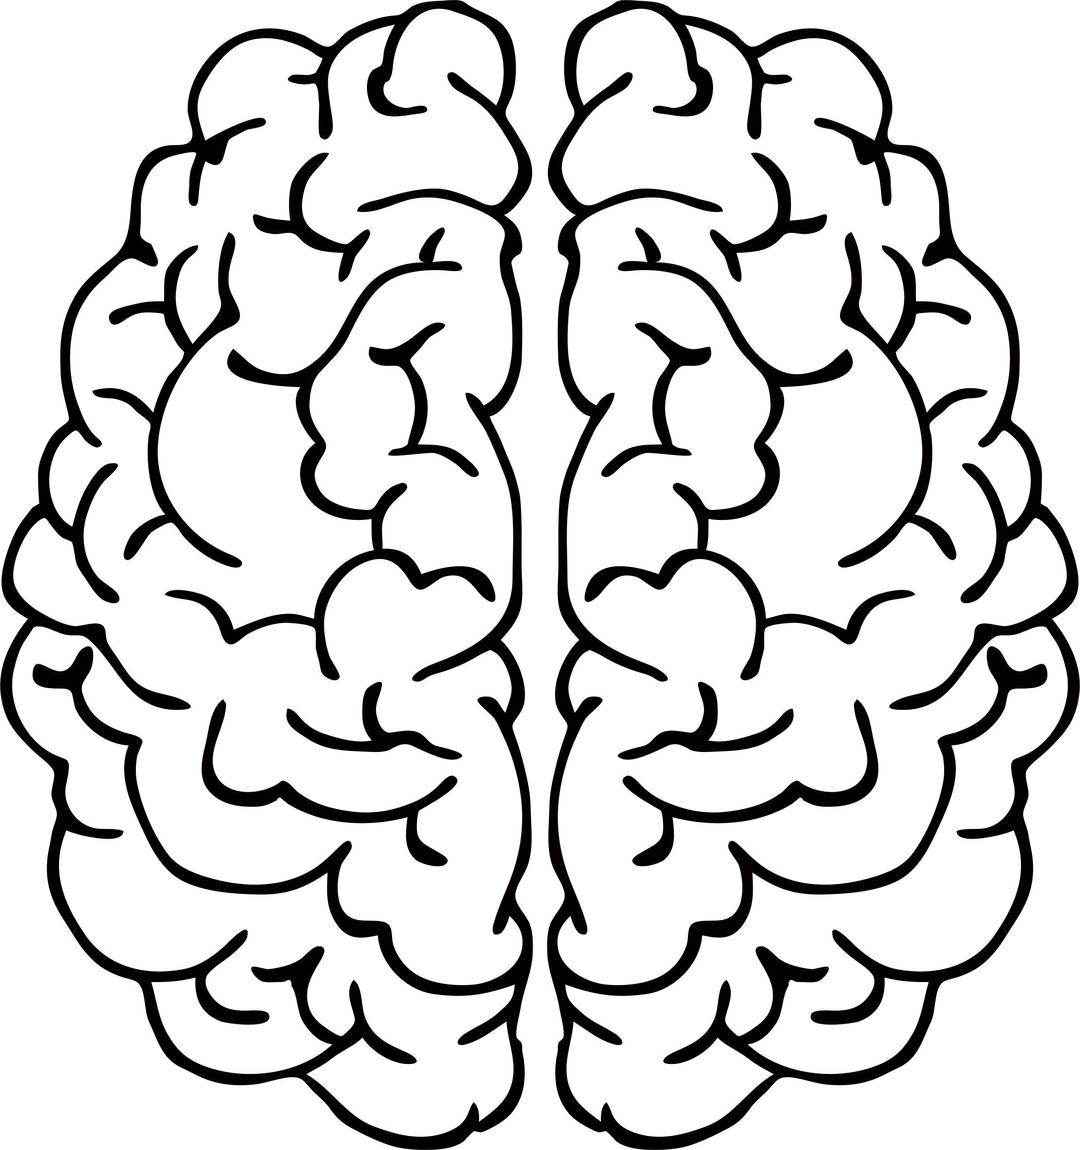 Abstract Brain Line Art png transparent